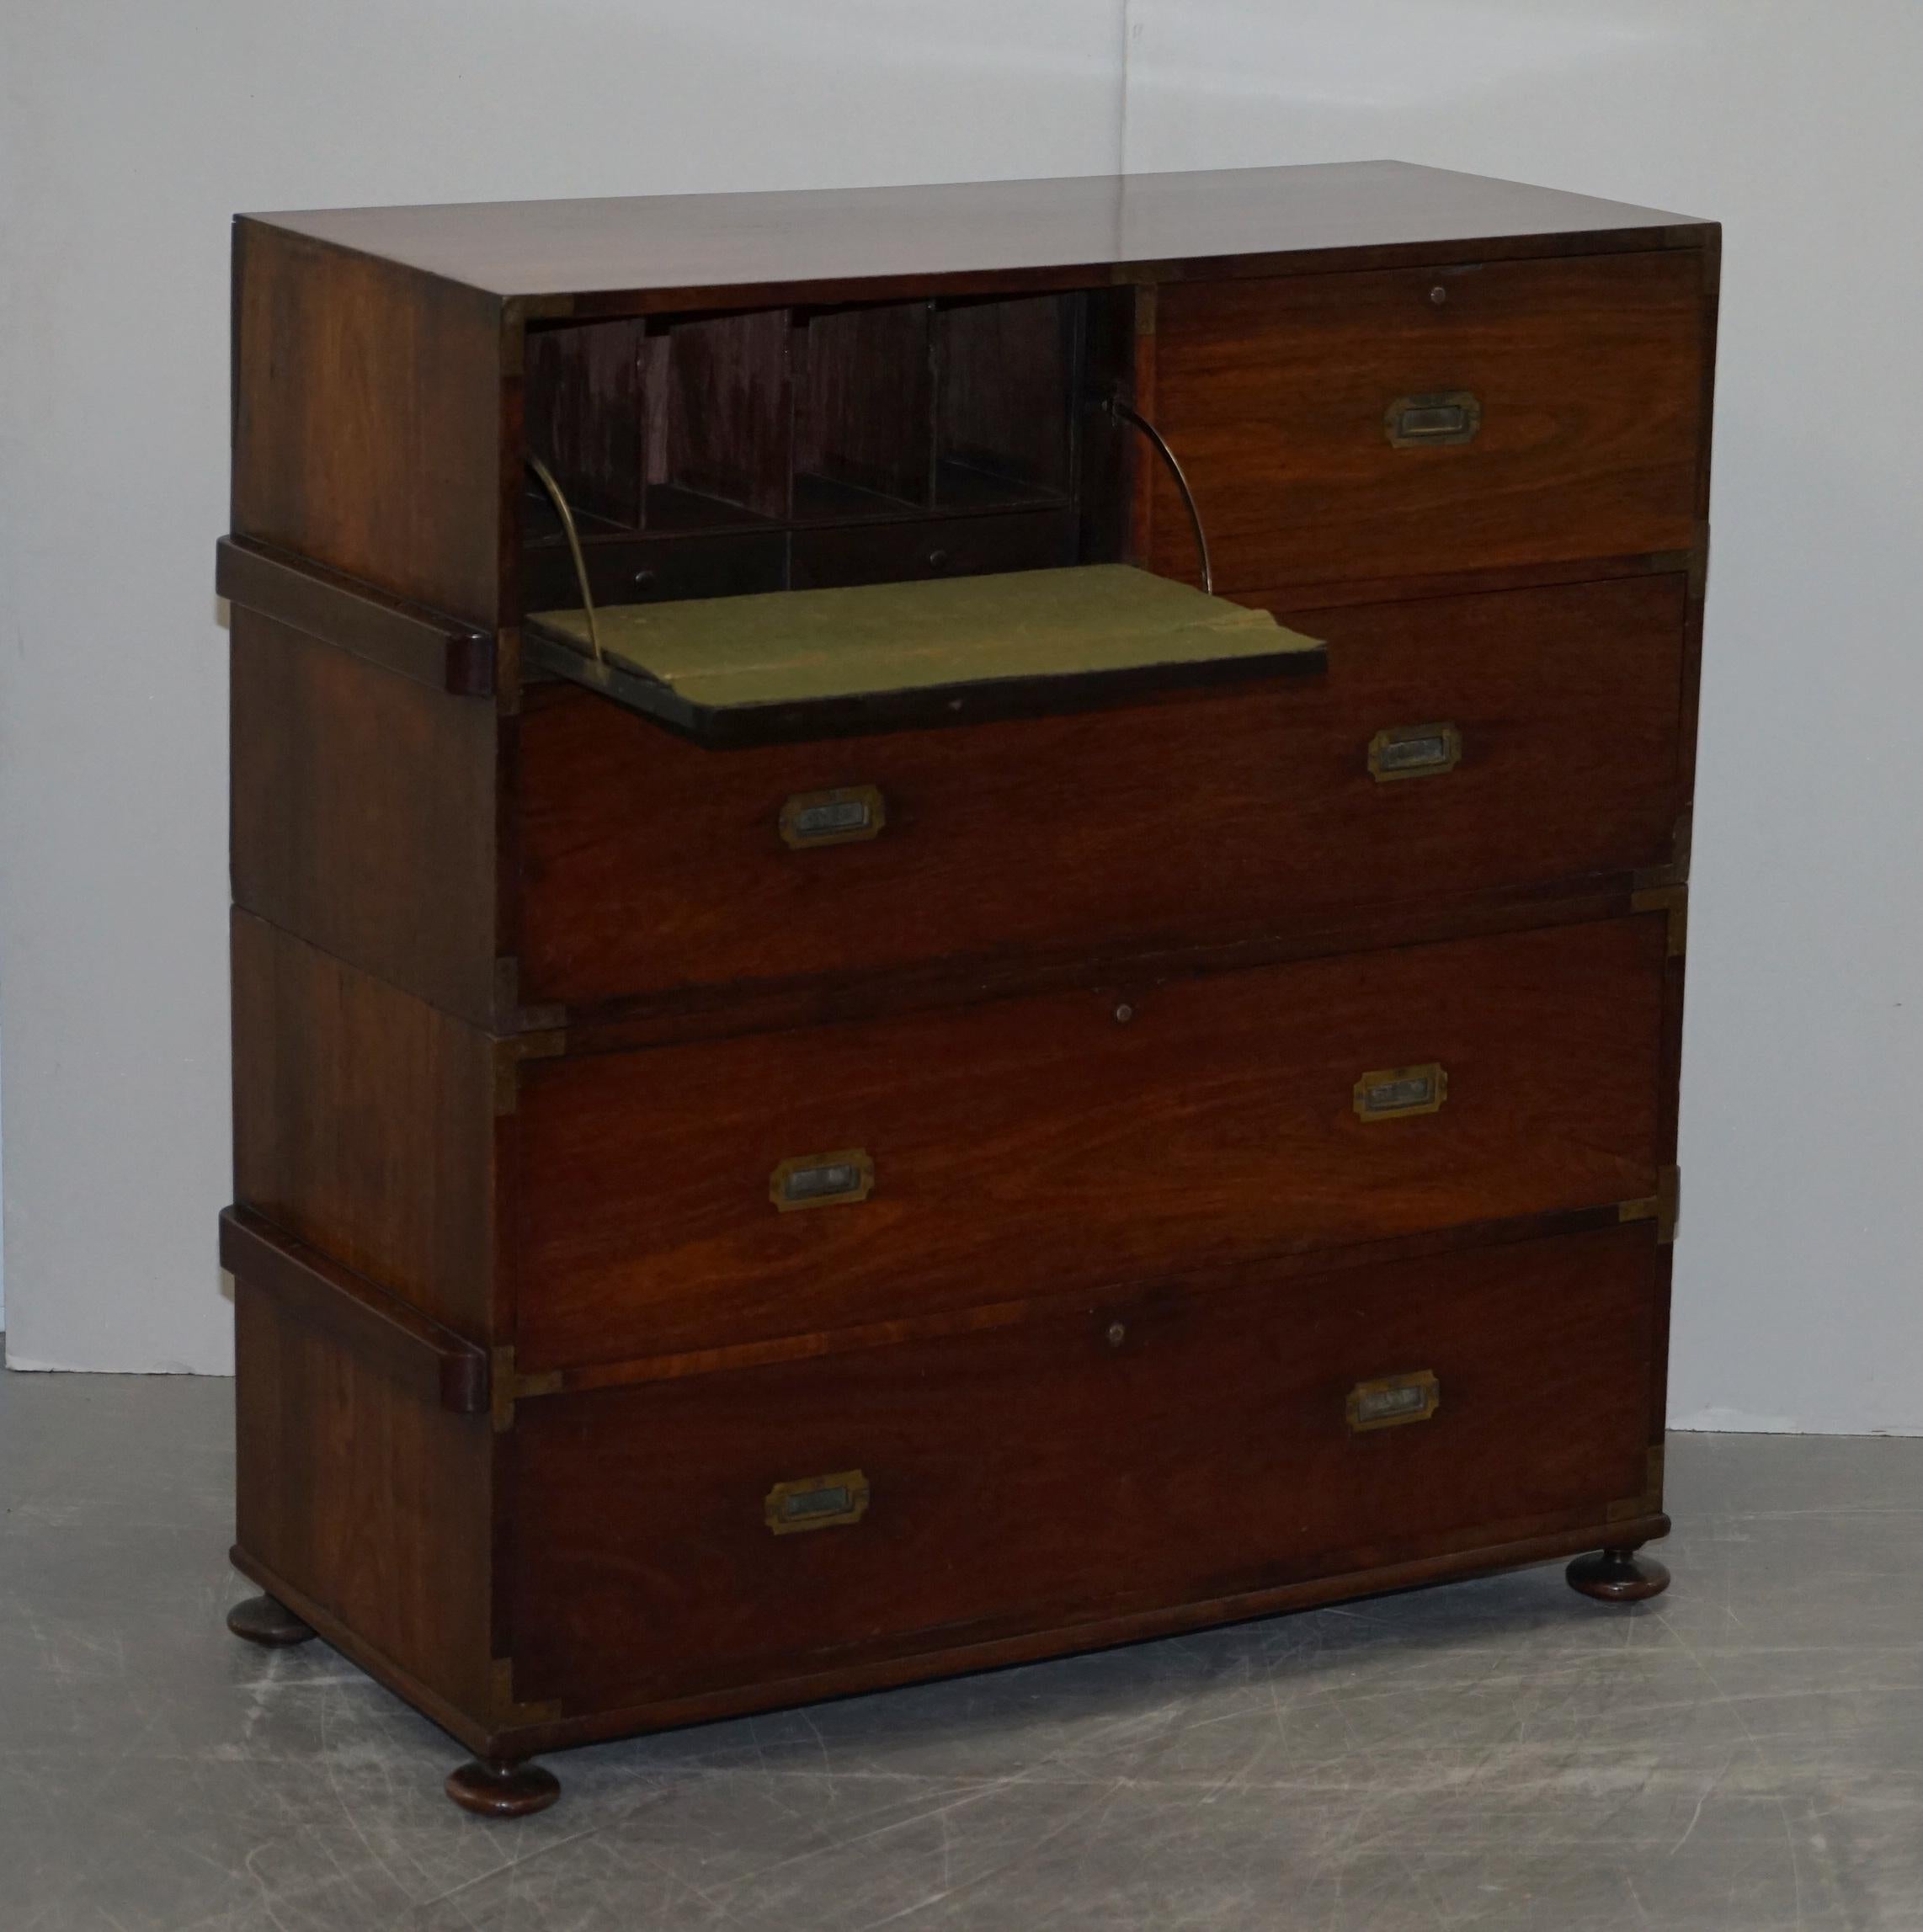 Restored 1876 Stamped Camphor Wood Military Campaign Chest of Drawers with Desk For Sale 7